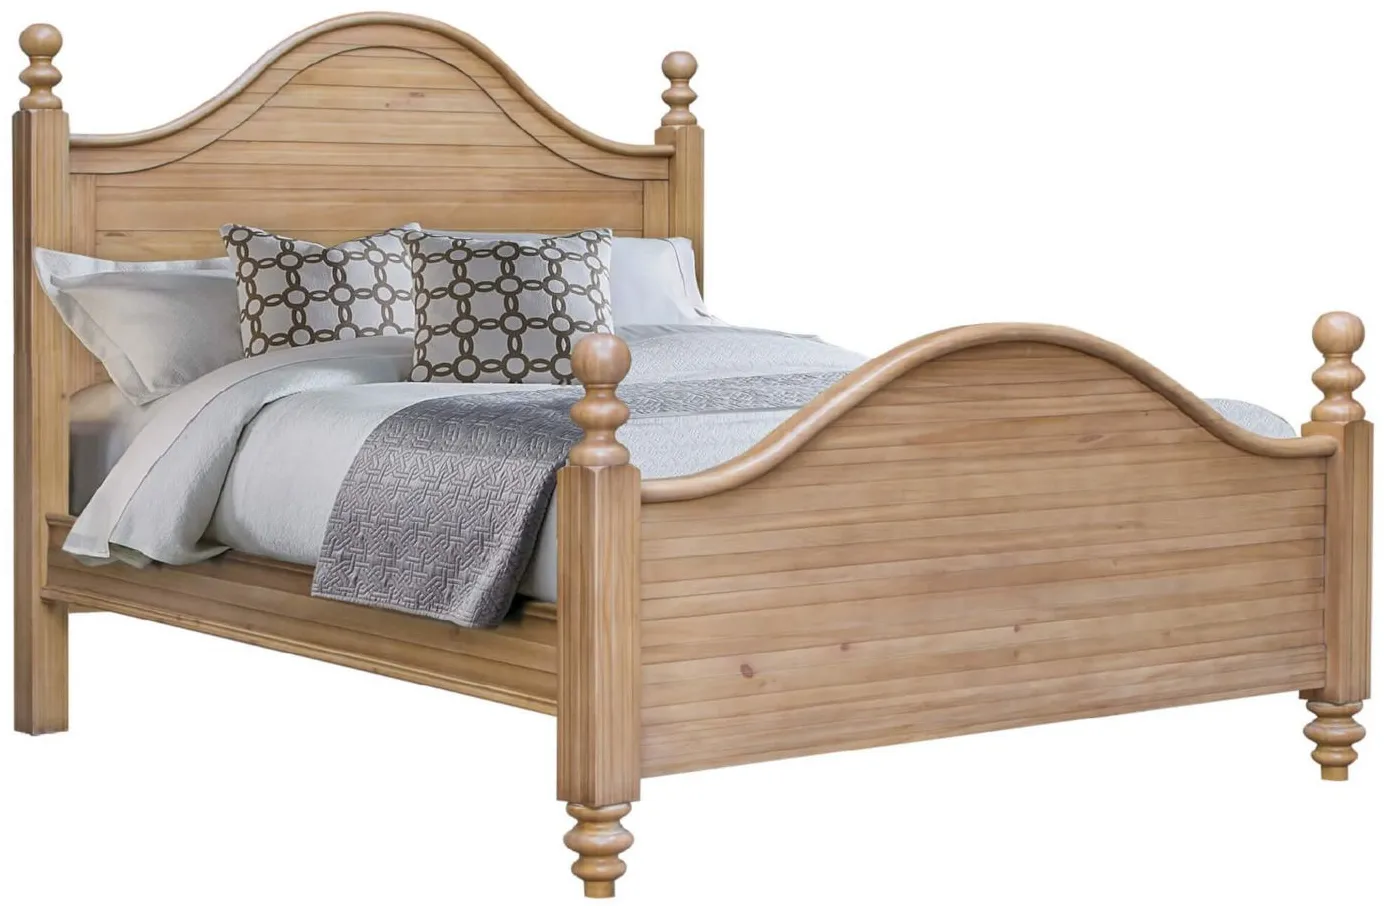 Vintage Casual King Bed in Distressed Natural Maple by Sunset Trading